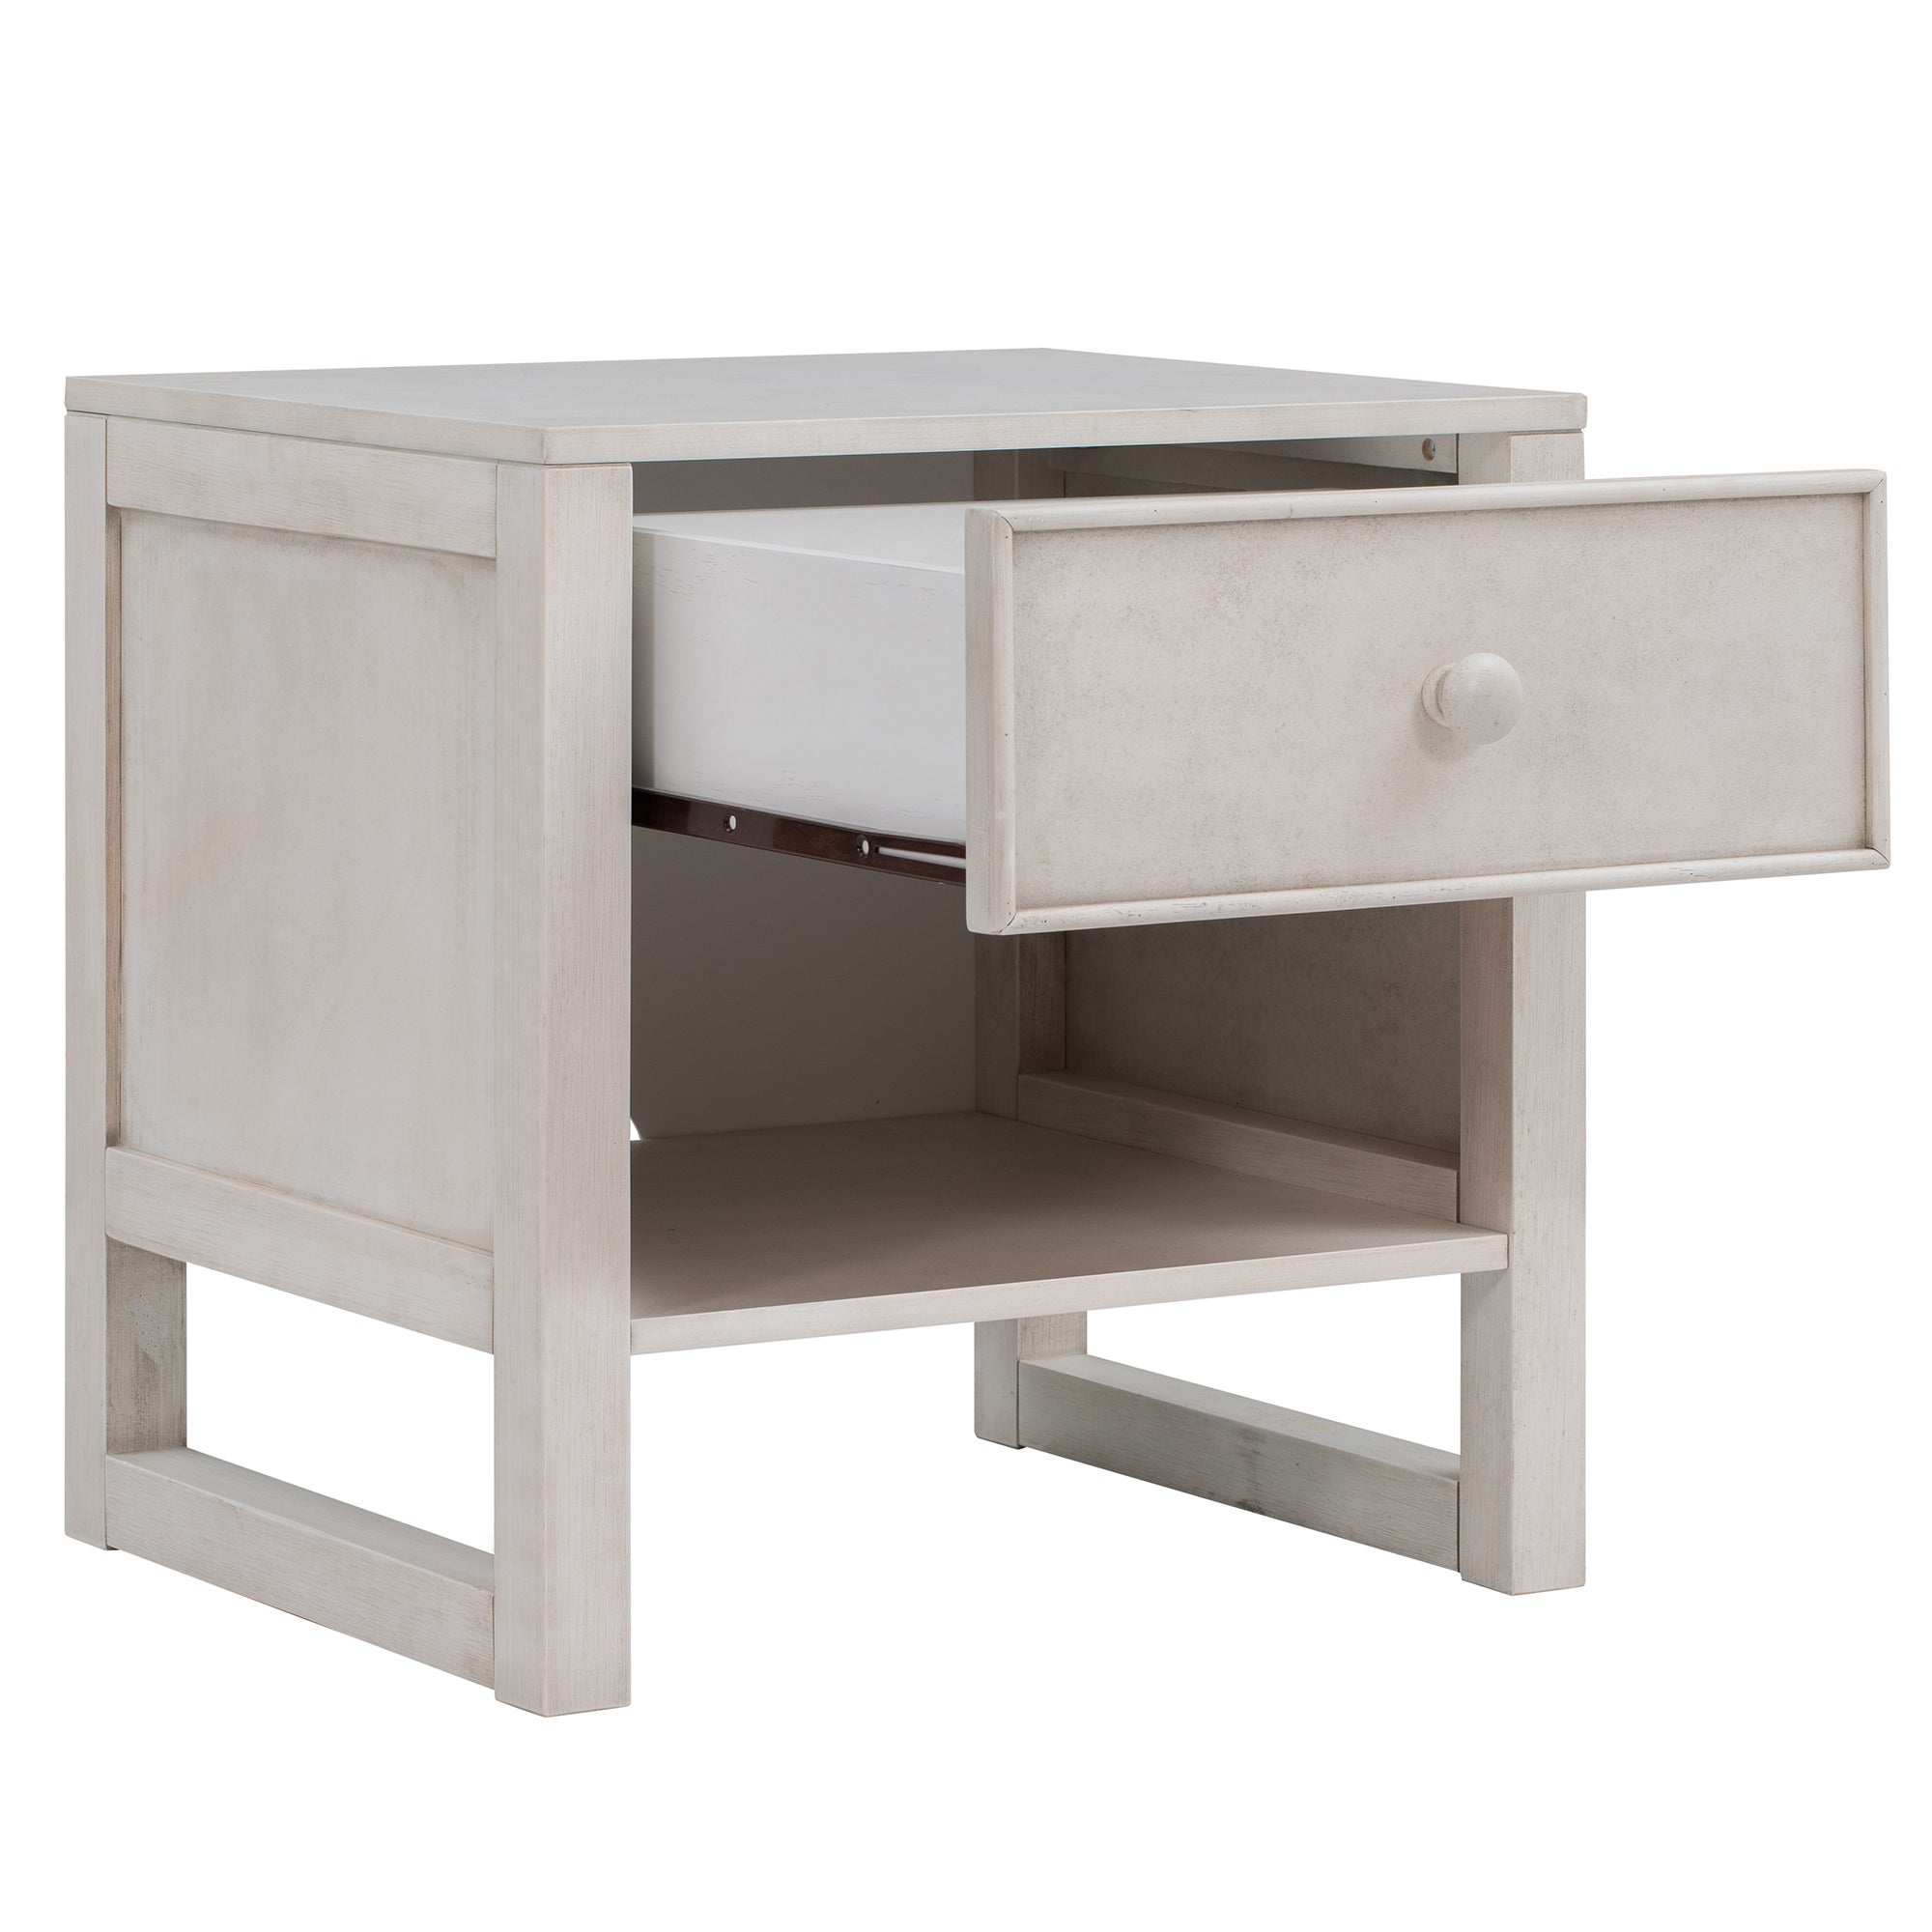 Wooden Nightstand with a Drawer and an Open Storage - Antique White